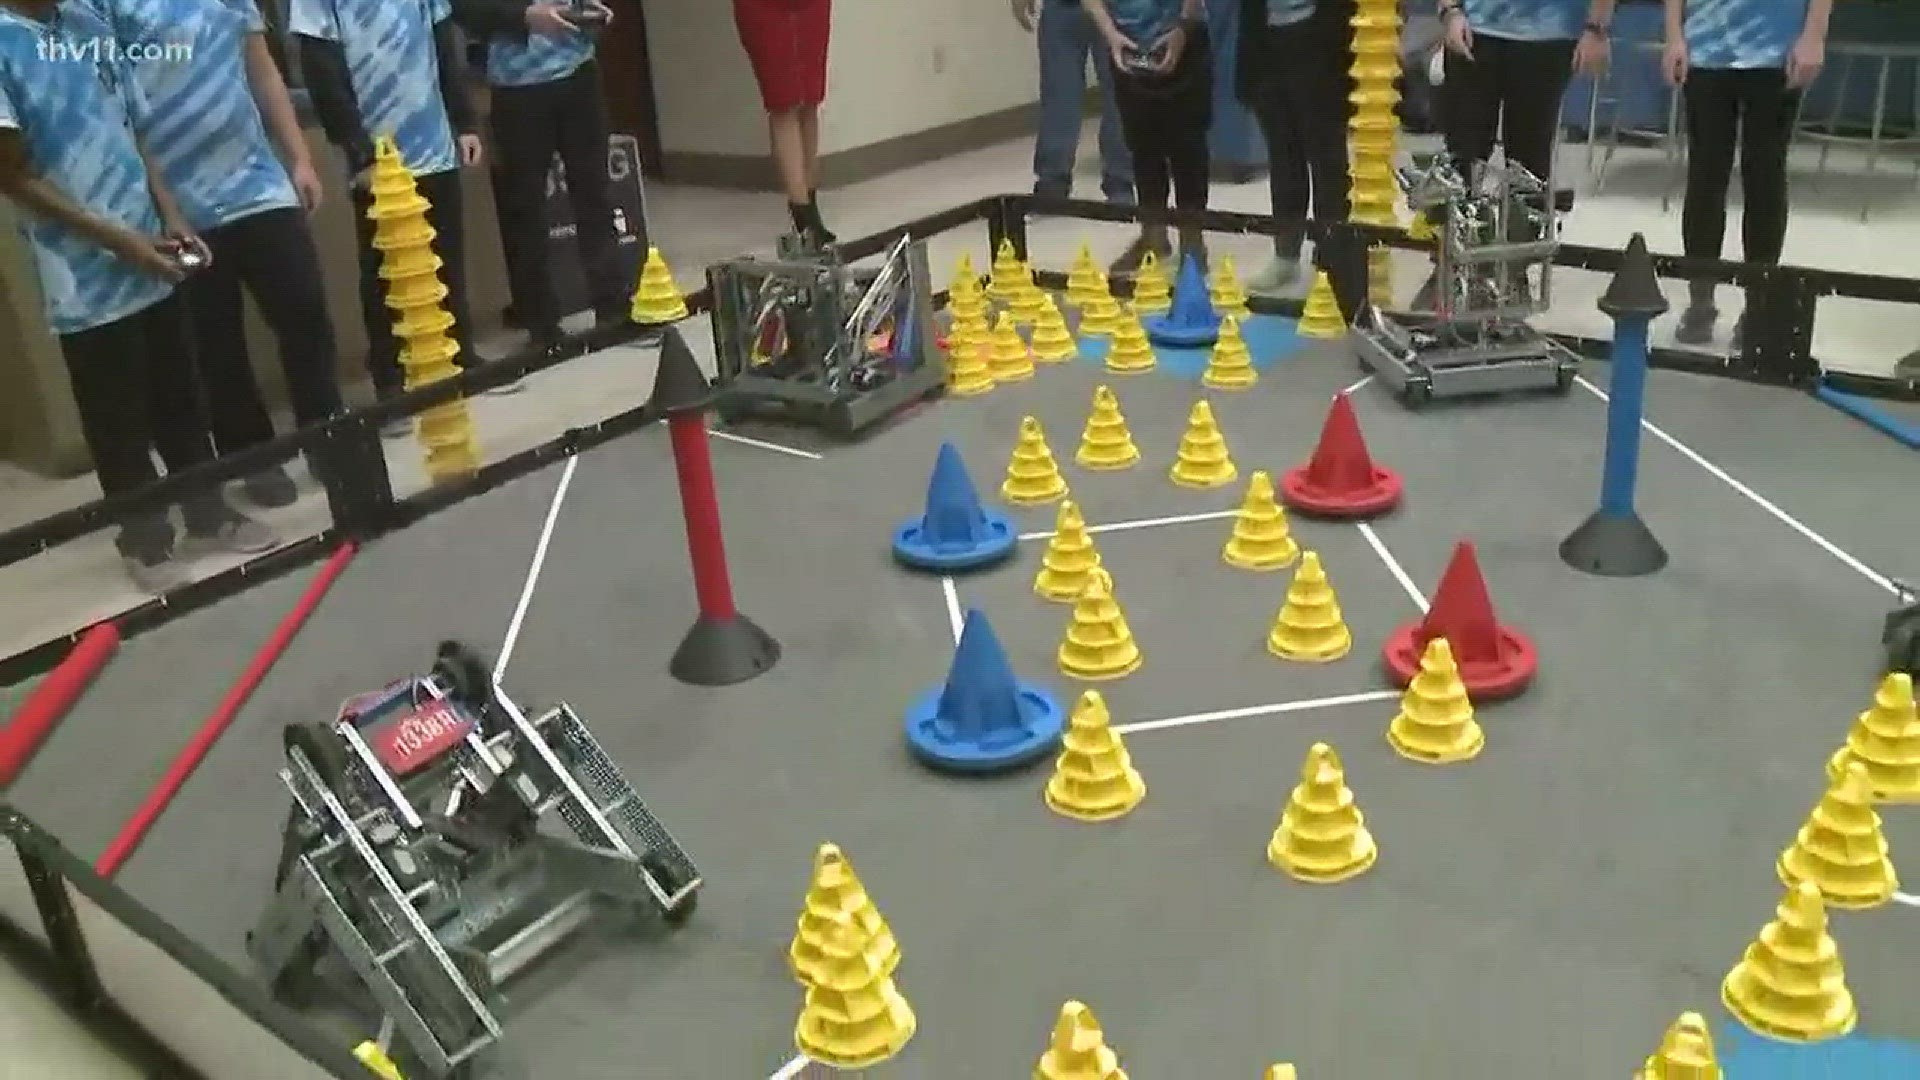 Students at Bryant Middle School are bringing the heat this weekend with their own handcrafted robots. THV11's Amanda Jaeger was live at Bryant on Wednesday morning to show us what's at stake!